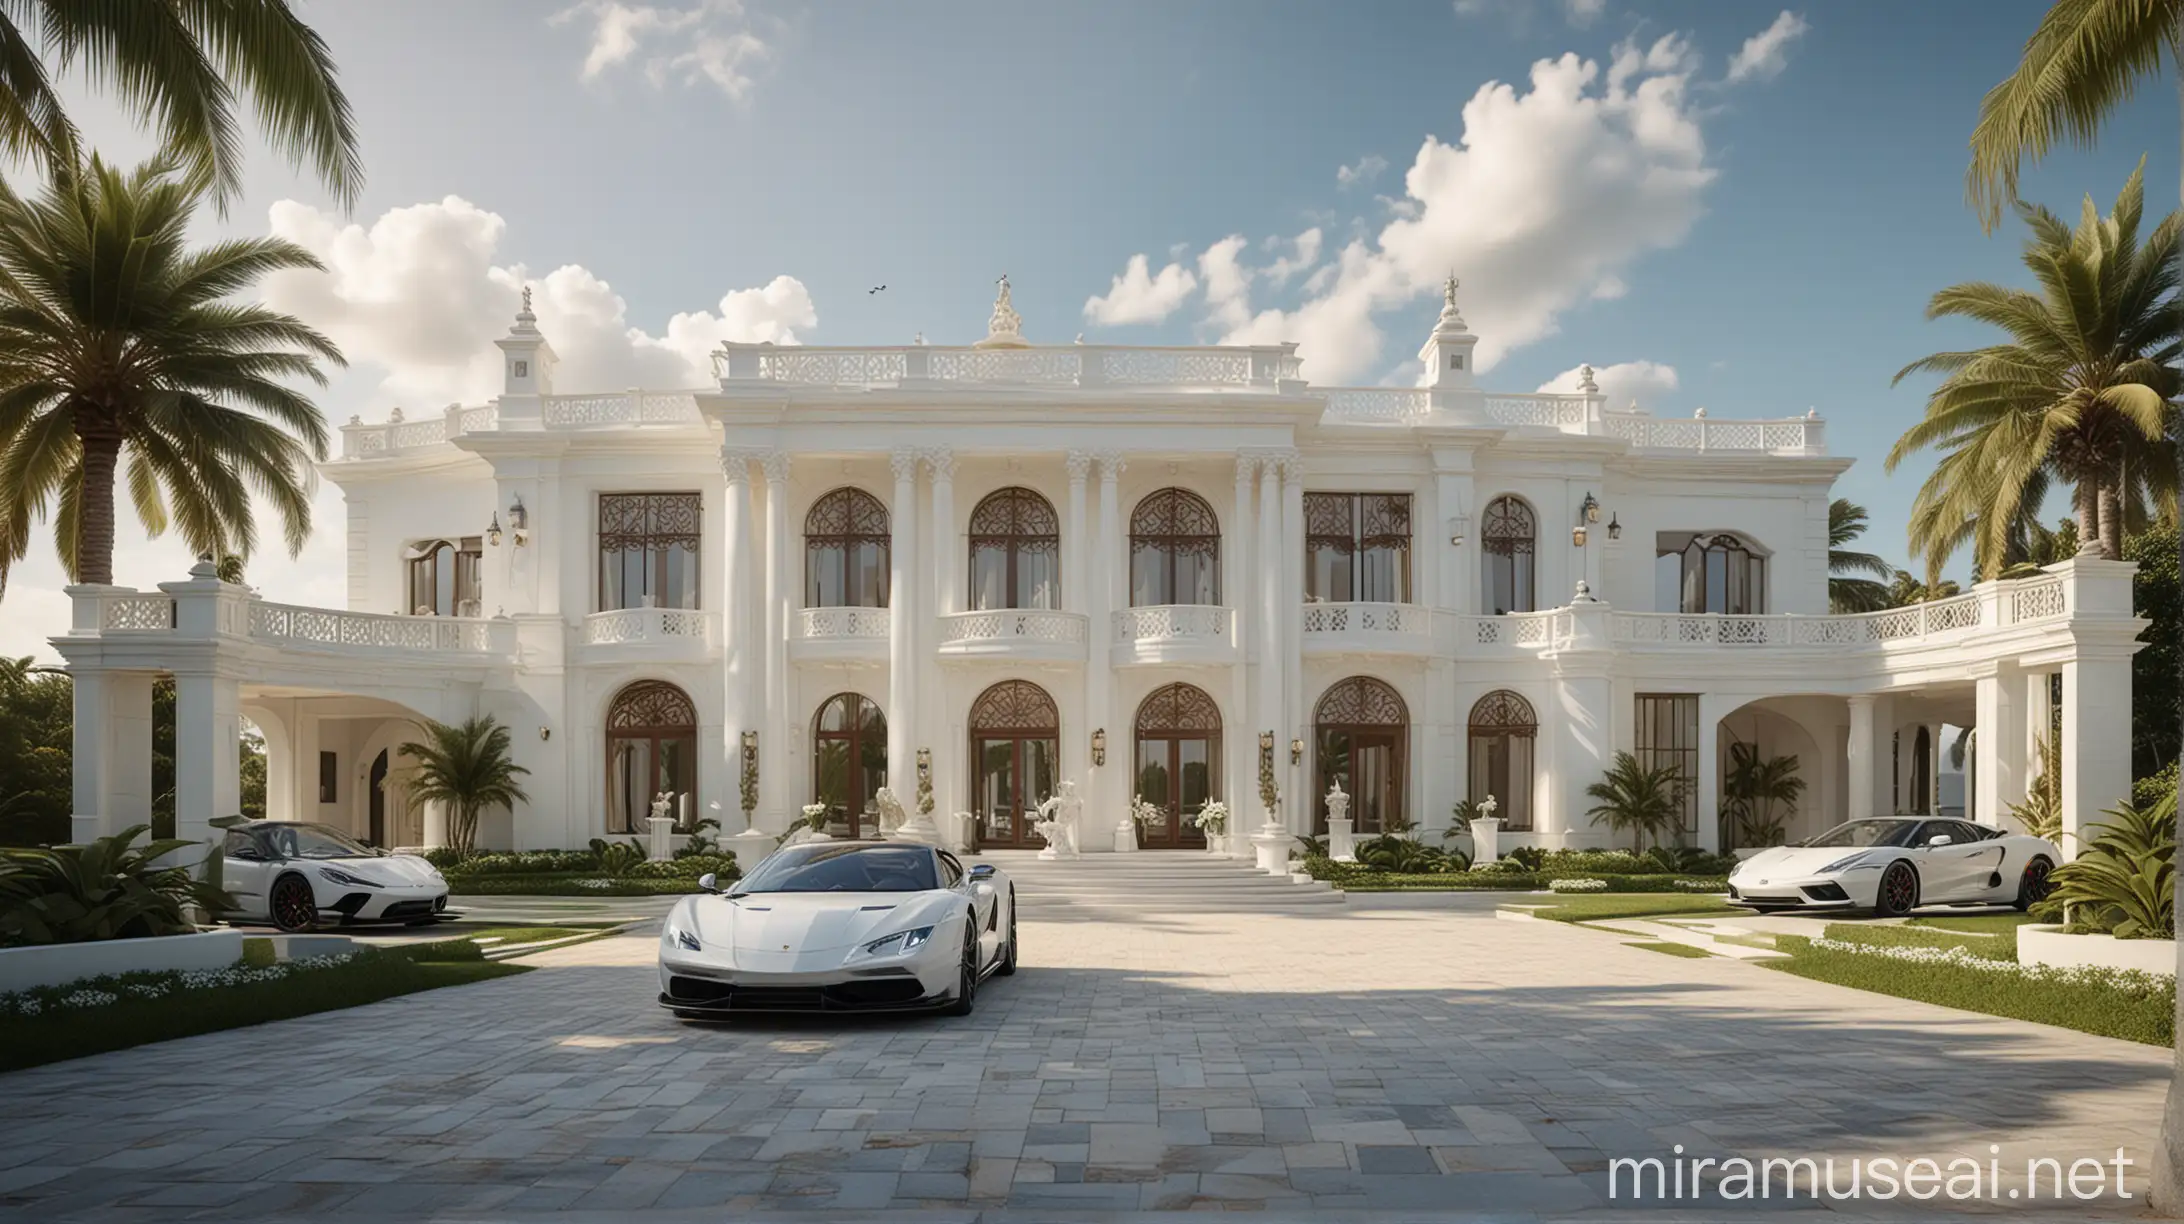 Luxury Modern Mansion by the Serene Ocean with Ornate Gate and Supercars